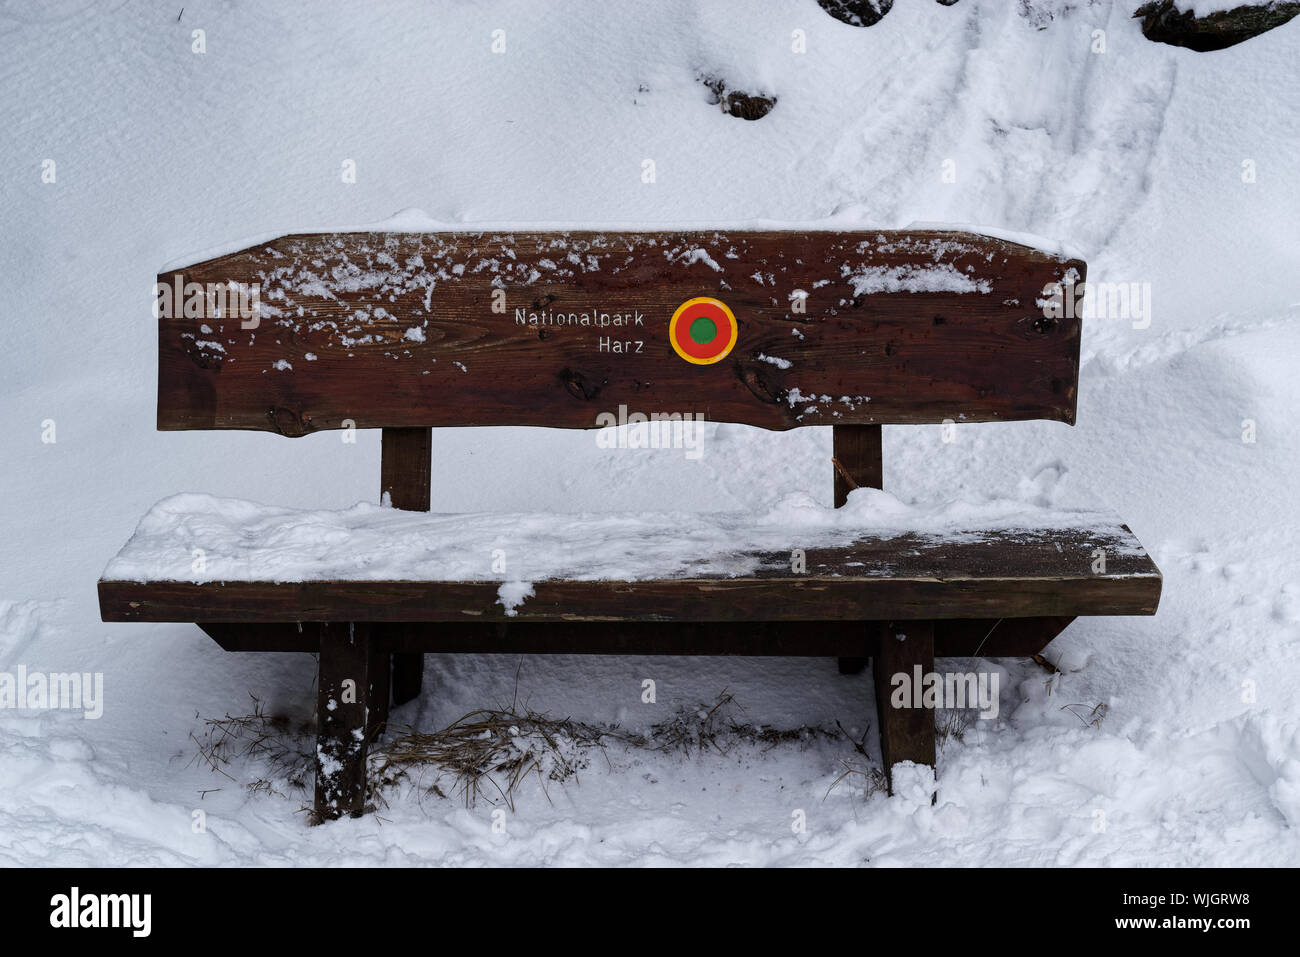 Wooden bench with a label 'harz national park' in a winter. Harz mountains region, Germany Stock Photo